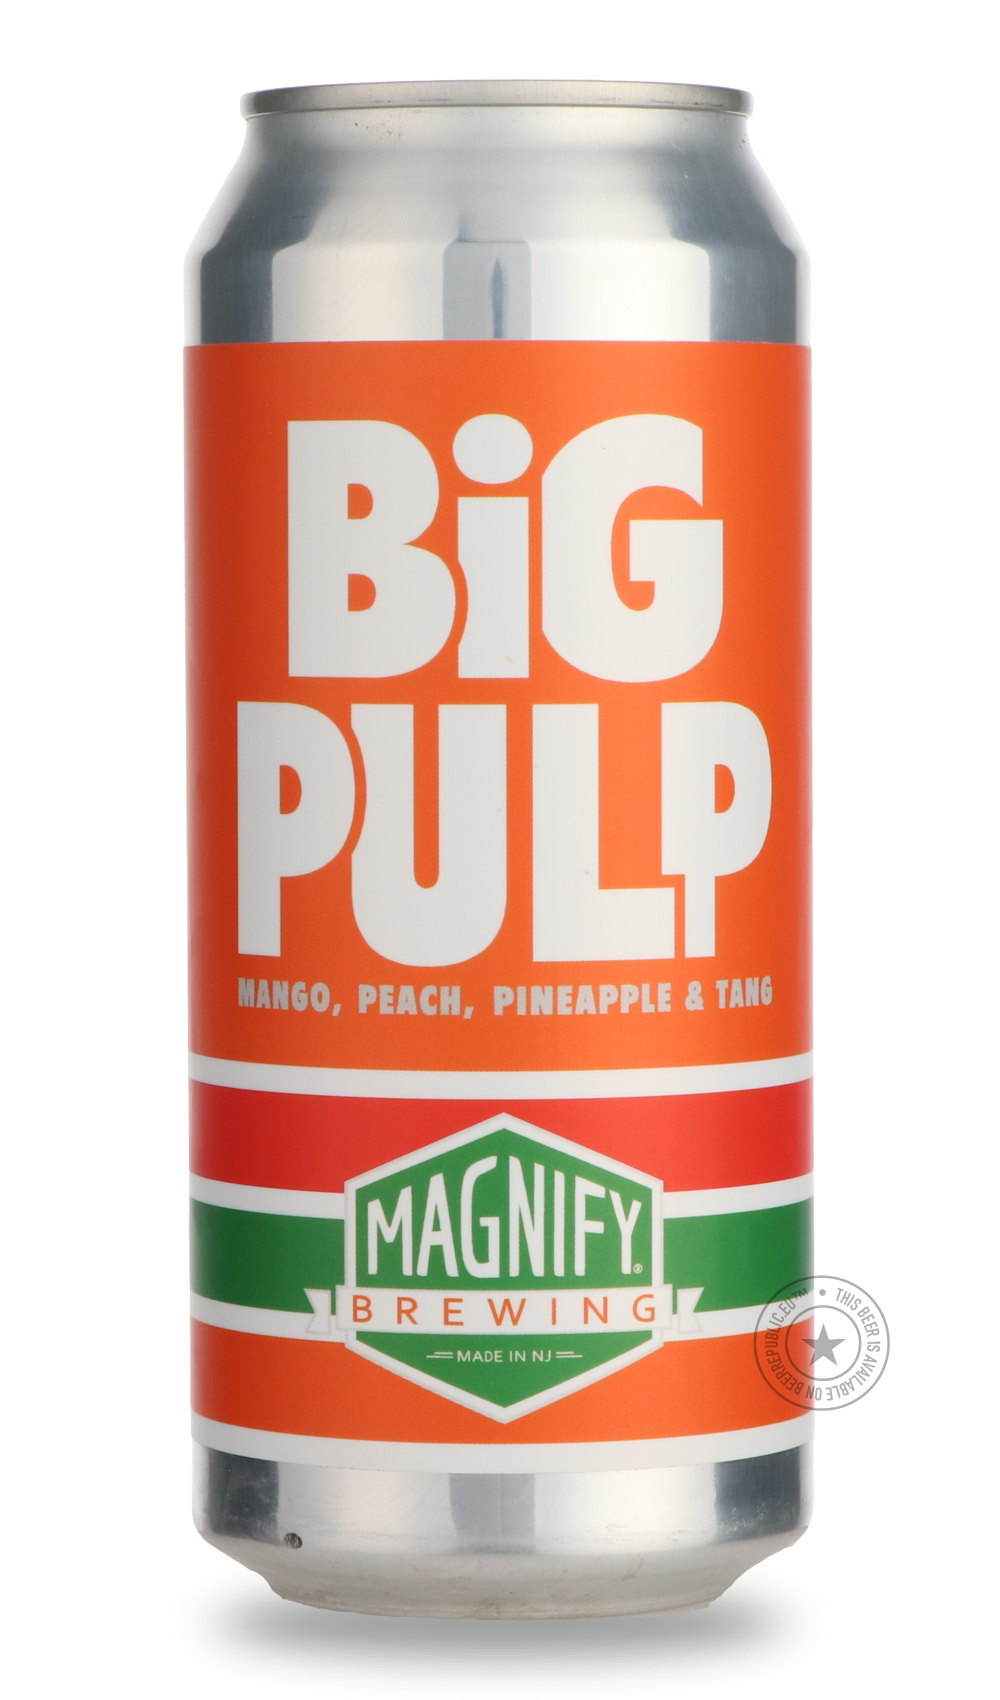 -Magnify- Big Pulp-Sour / Wild & Fruity- Only @ Beer Republic - The best online beer store for American & Canadian craft beer - Buy beer online from the USA and Canada - Bier online kopen - Amerikaans bier kopen - Craft beer store - Craft beer kopen - Amerikanisch bier kaufen - Bier online kaufen - Acheter biere online - IPA - Stout - Porter - New England IPA - Hazy IPA - Imperial Stout - Barrel Aged - Barrel Aged Imperial Stout - Brown - Dark beer - Blond - Blonde - Pilsner - Lager - Wheat - Weizen - Amber